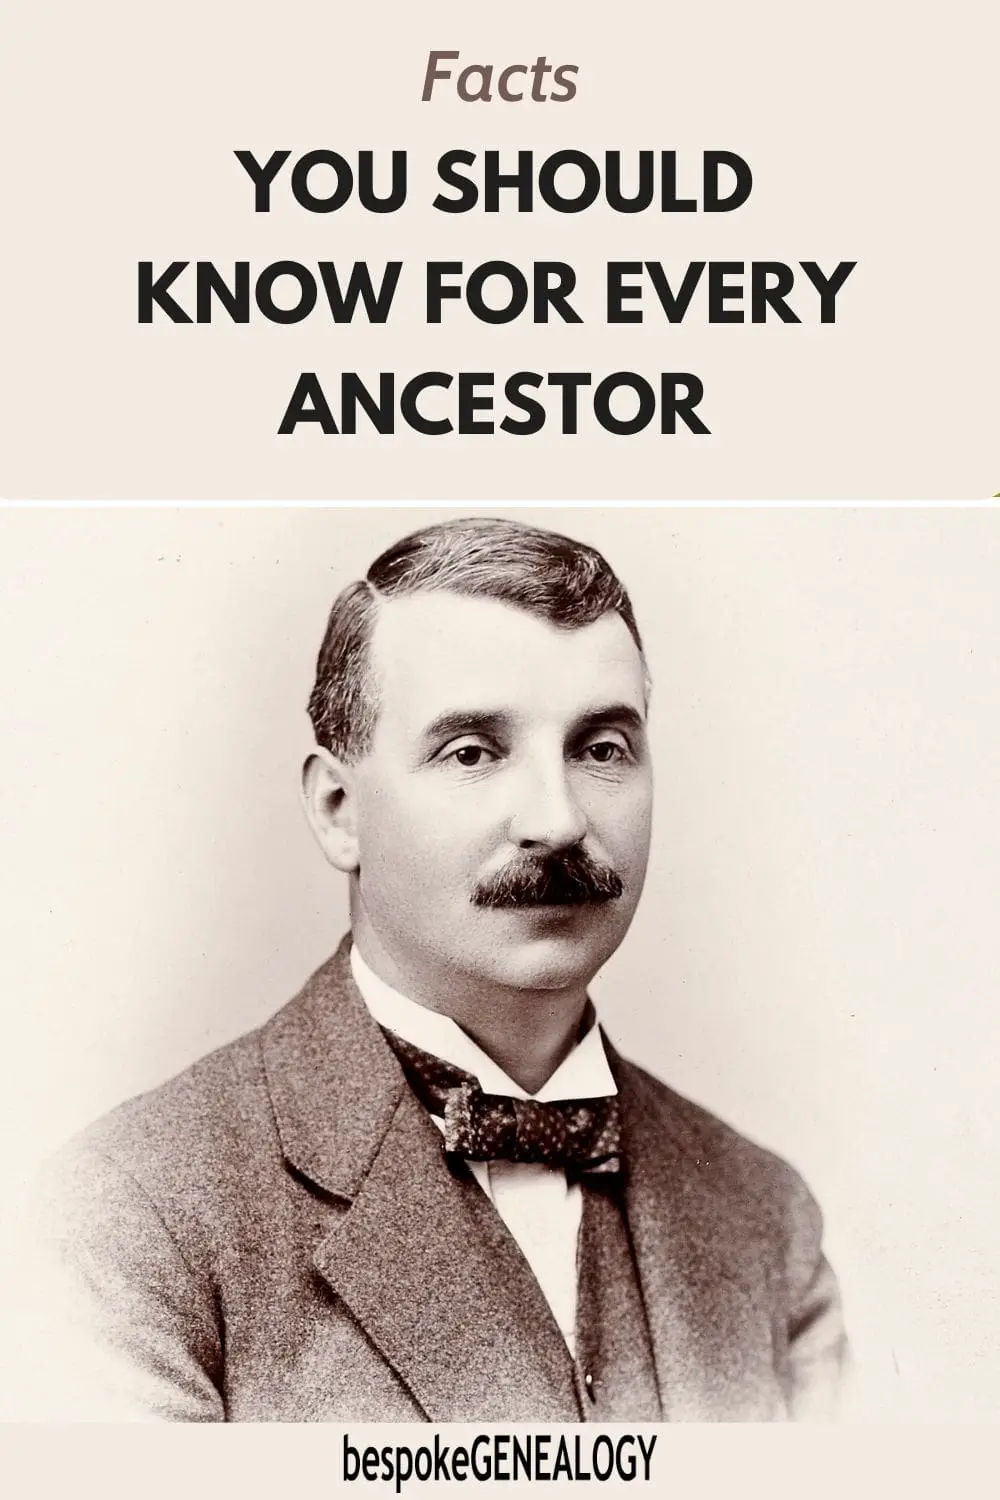 Facts you should know for every ancestor. Victorian photography of a well dressed gentleman.